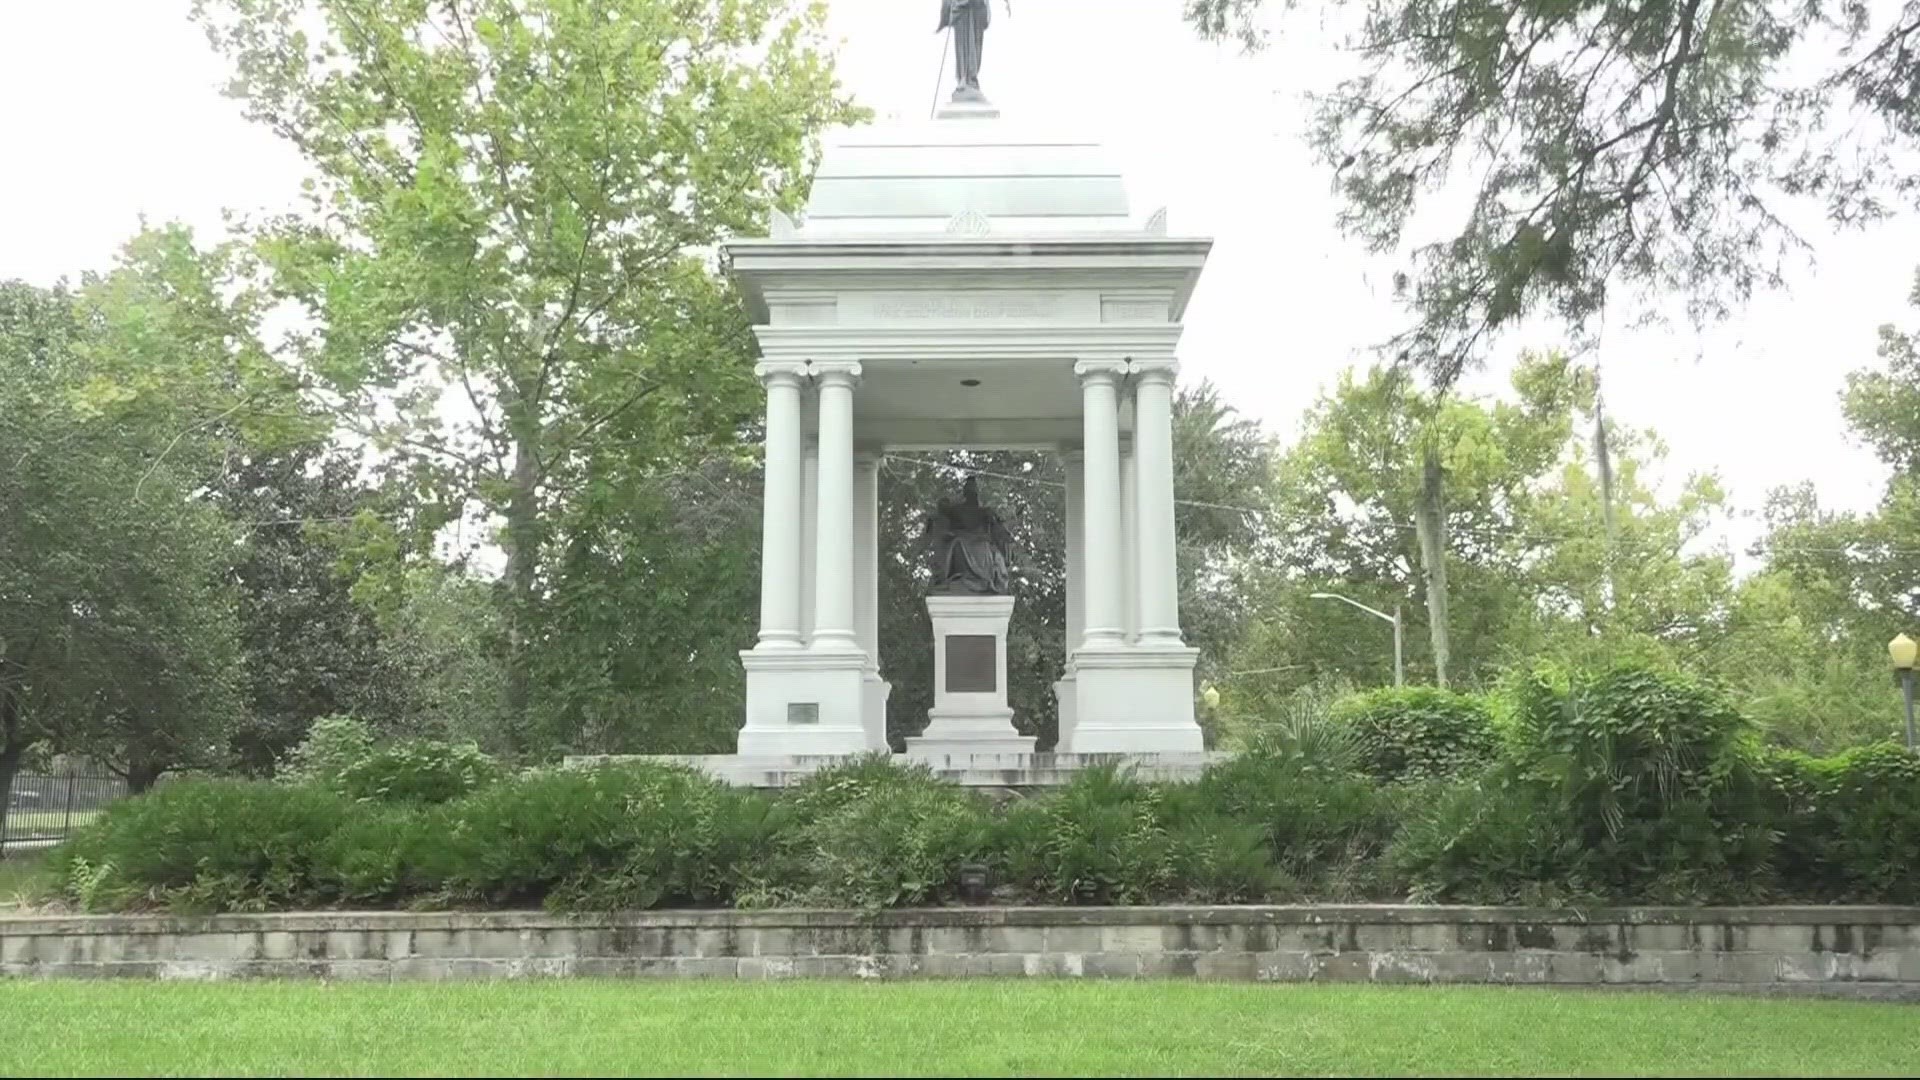 Jacksonville group continuing to advocate for Confederate monument removal.